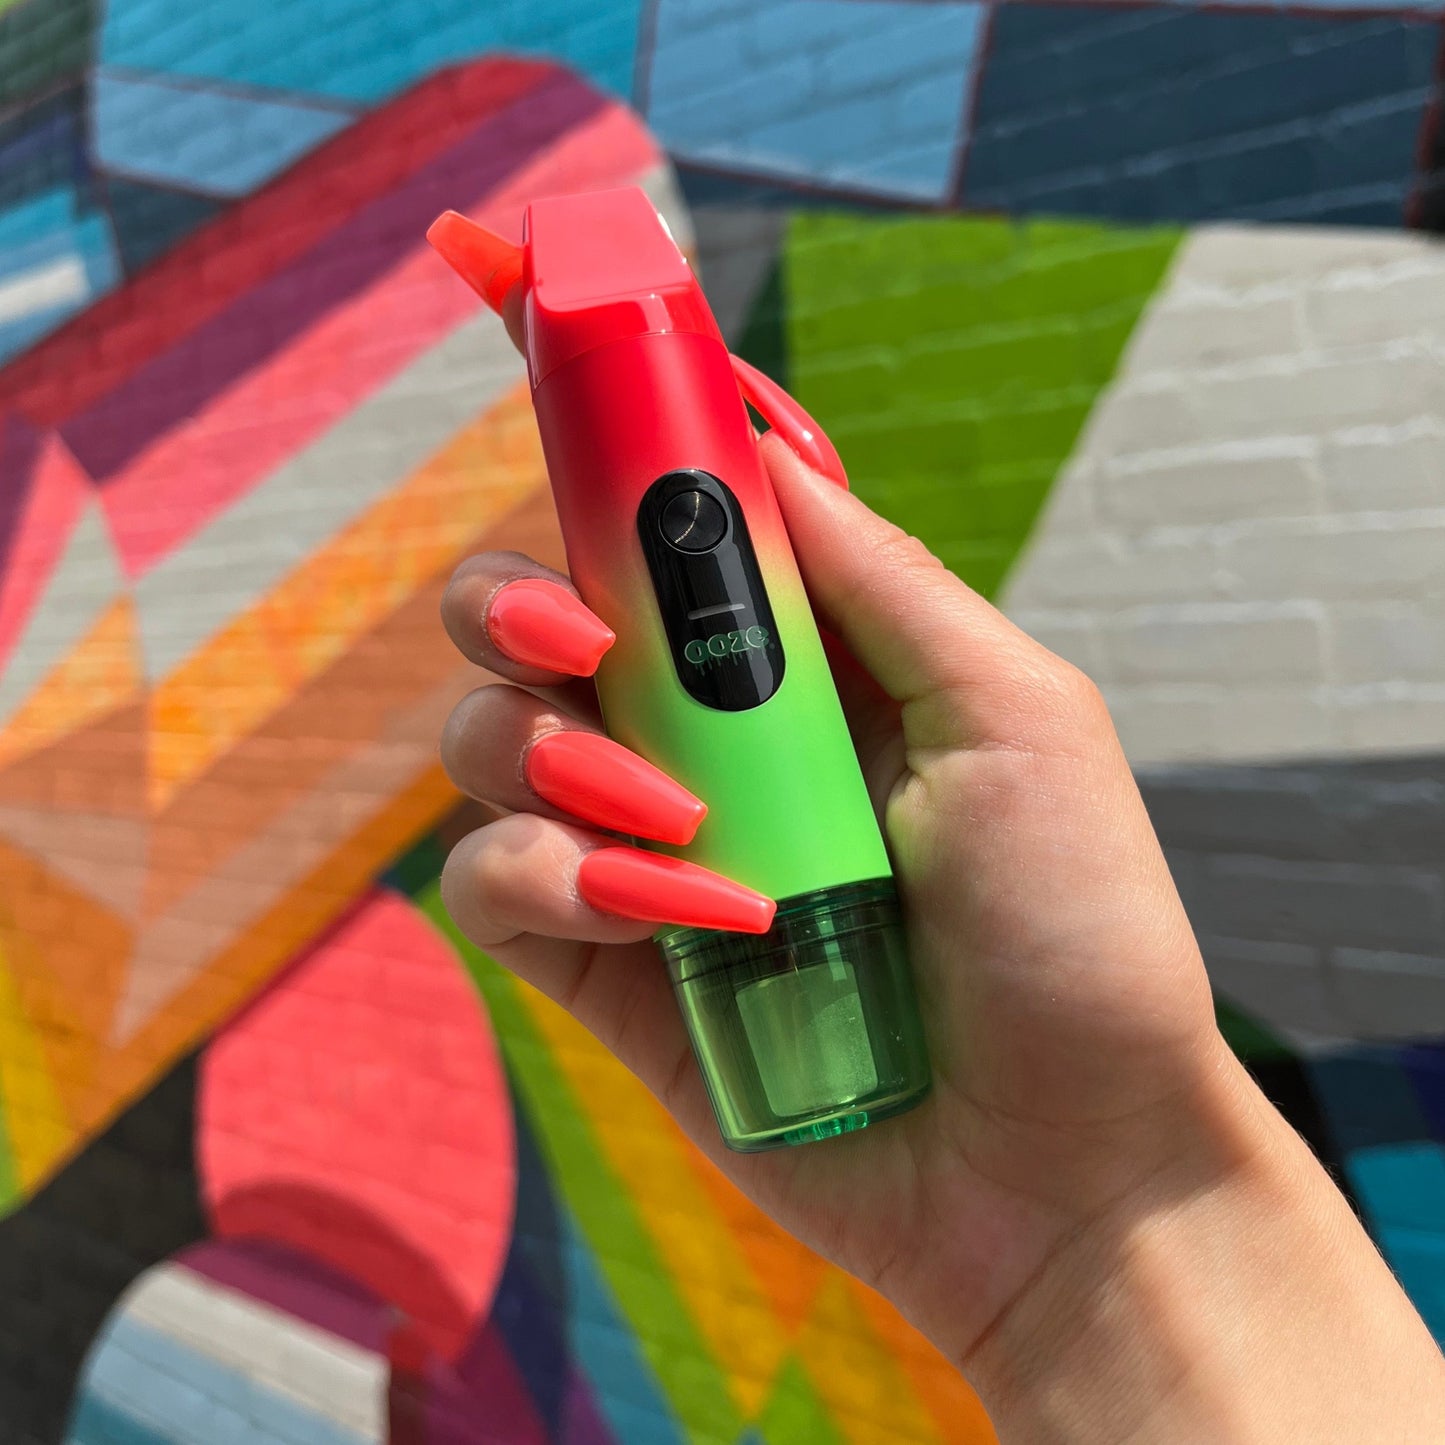 A girl's hand with long orange acrylic nails is holding the Rasta Ooze Booster in front of a colorful mural